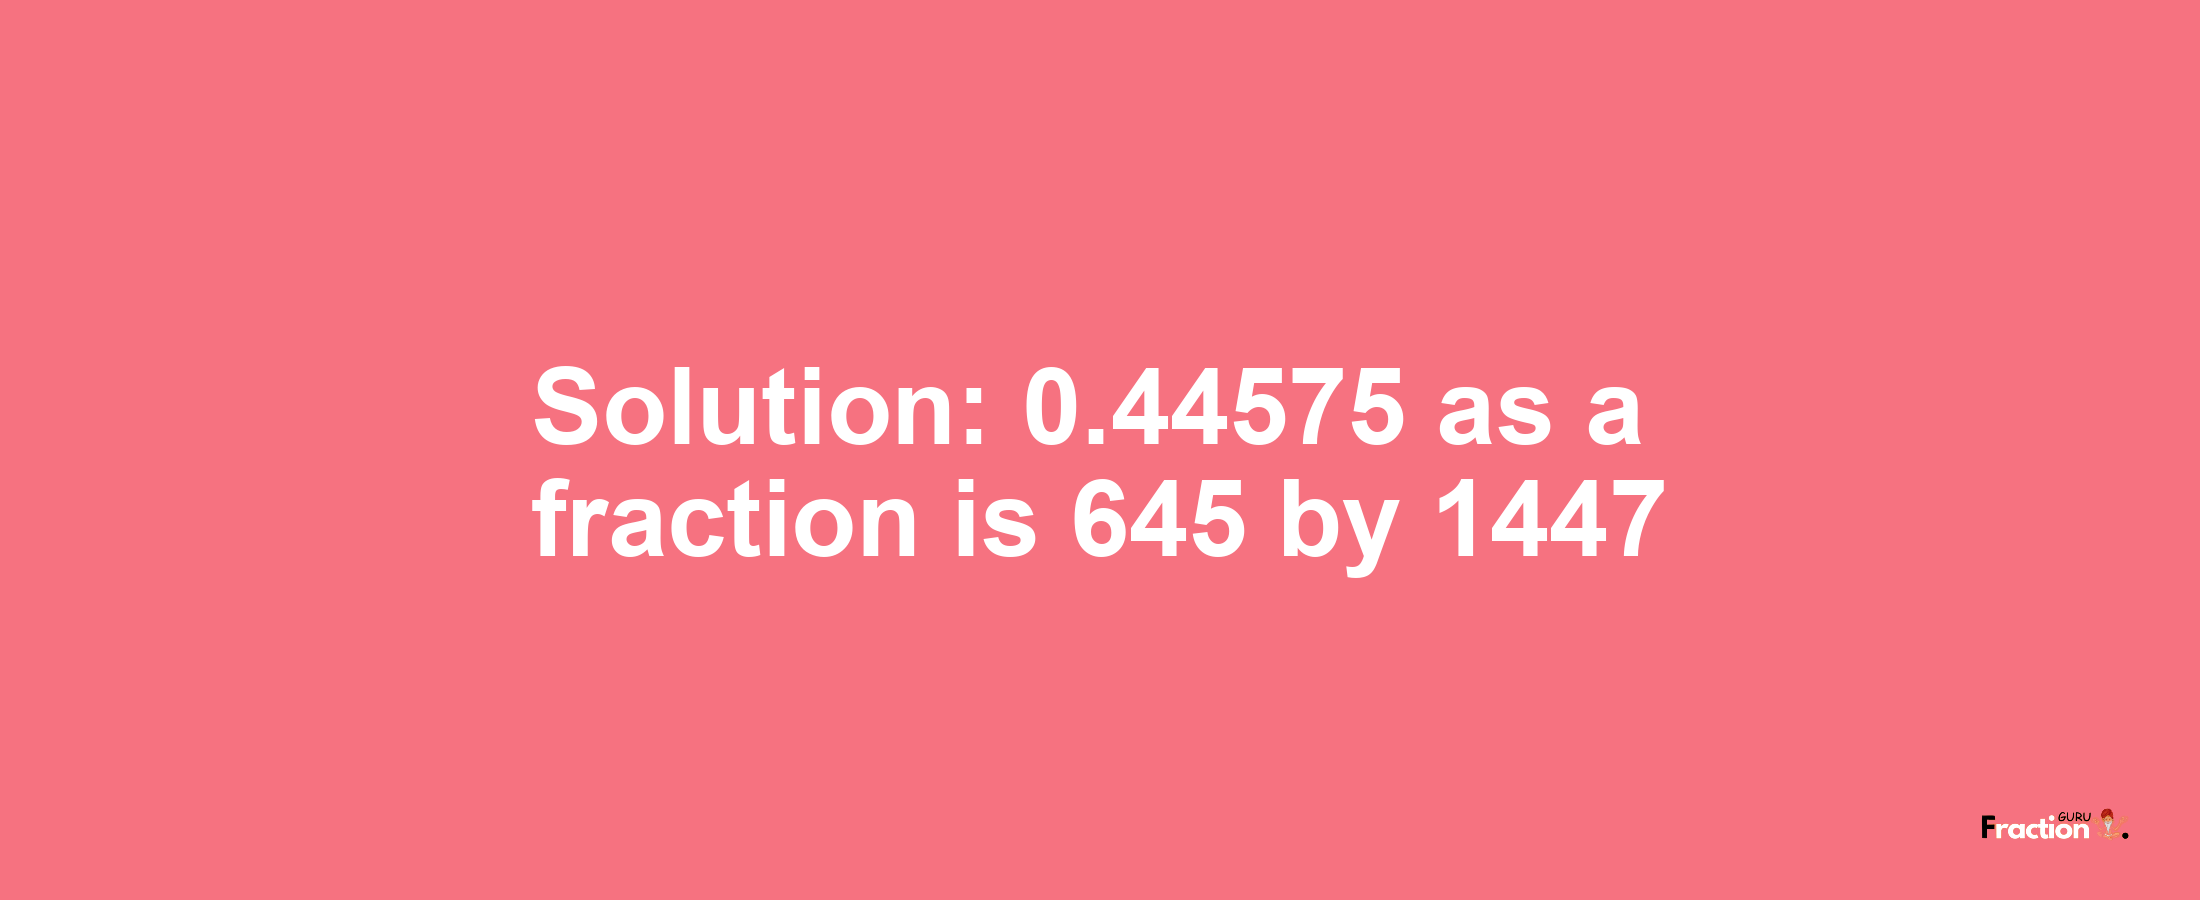 Solution:0.44575 as a fraction is 645/1447